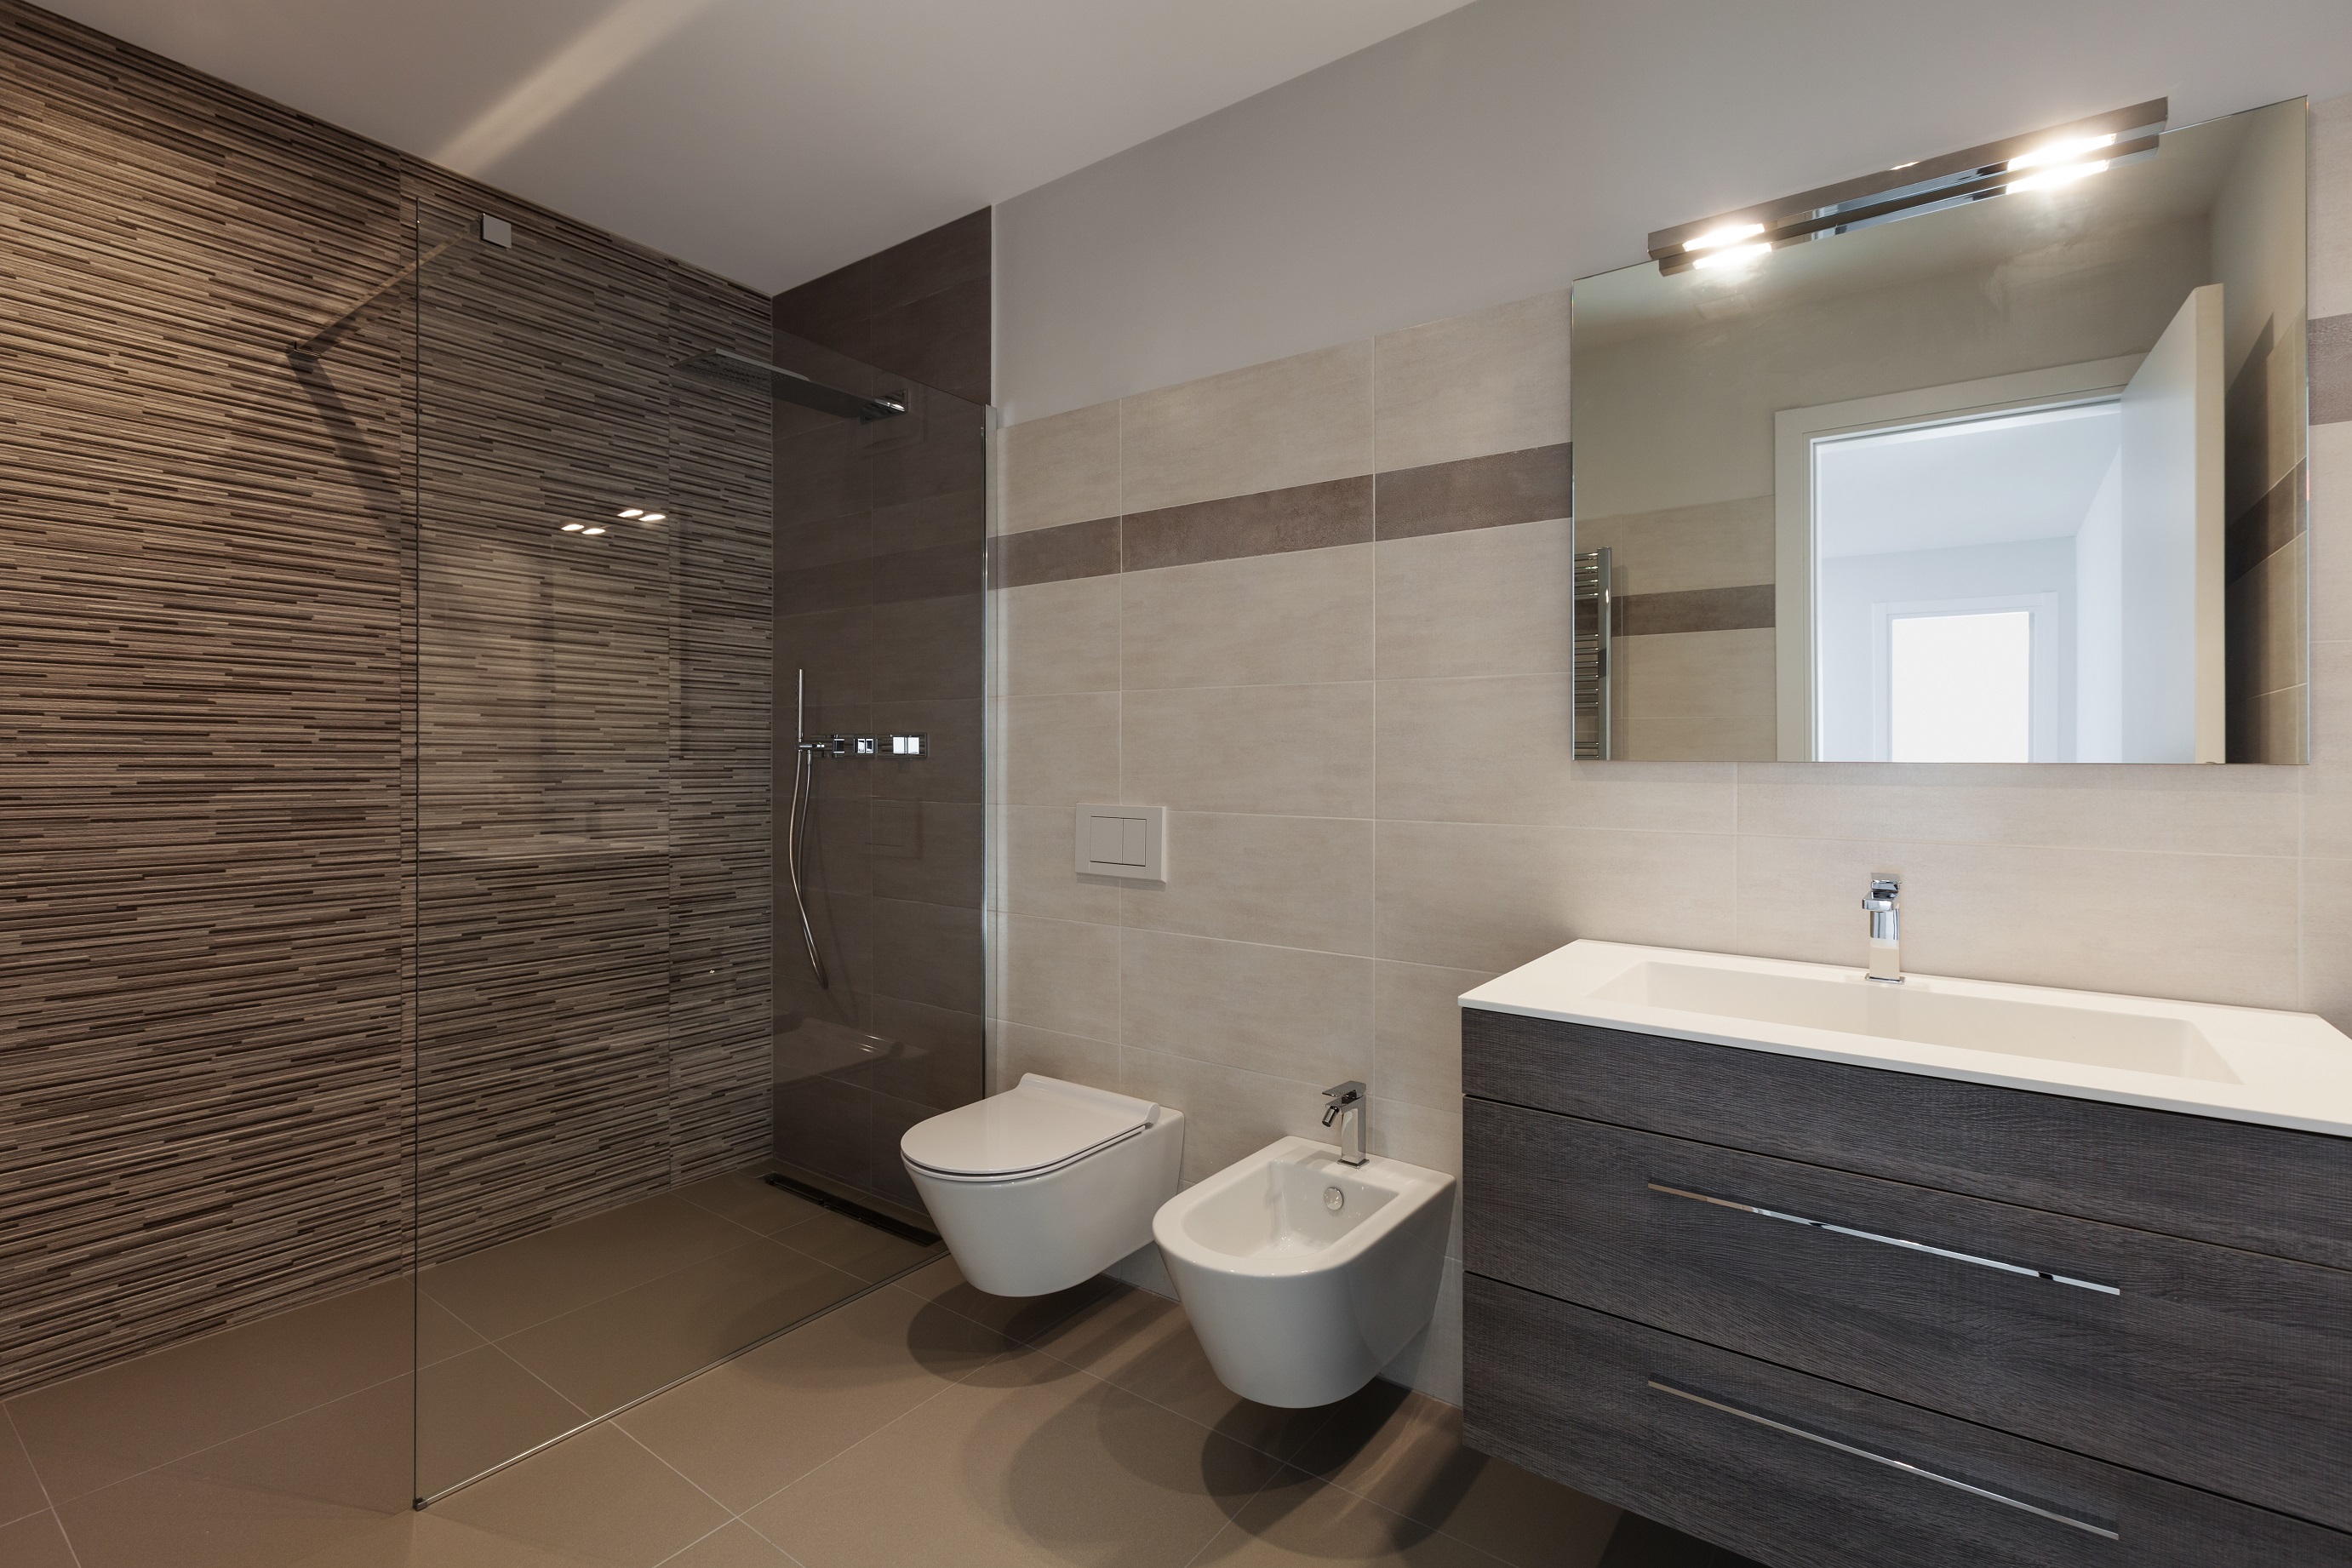 interior of new apartment, modern bathroom with shower